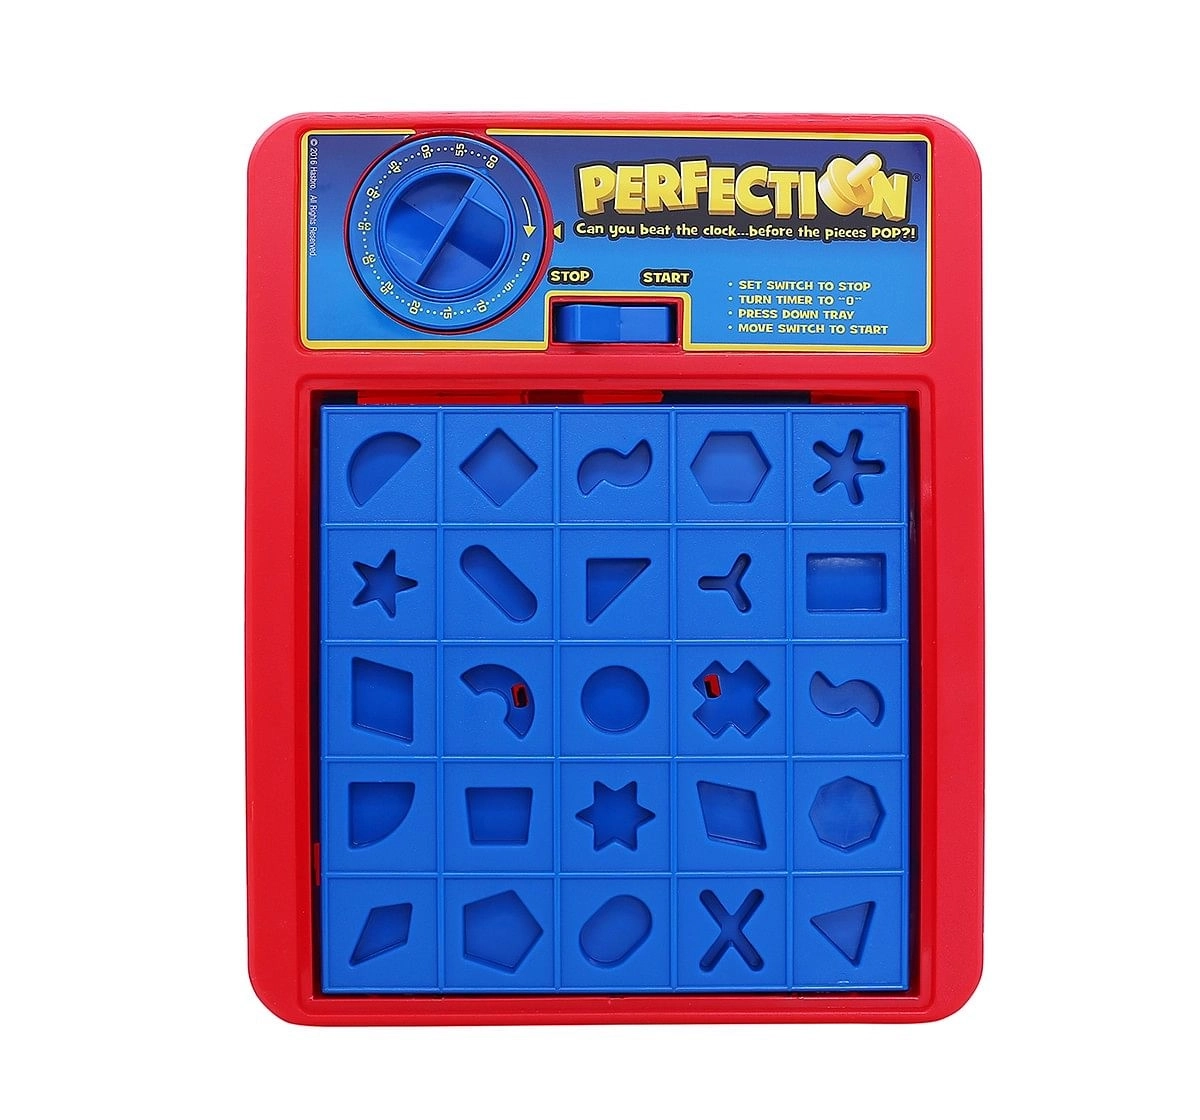 Hasbro Perfection Game Games for Kids age 5Y+ 